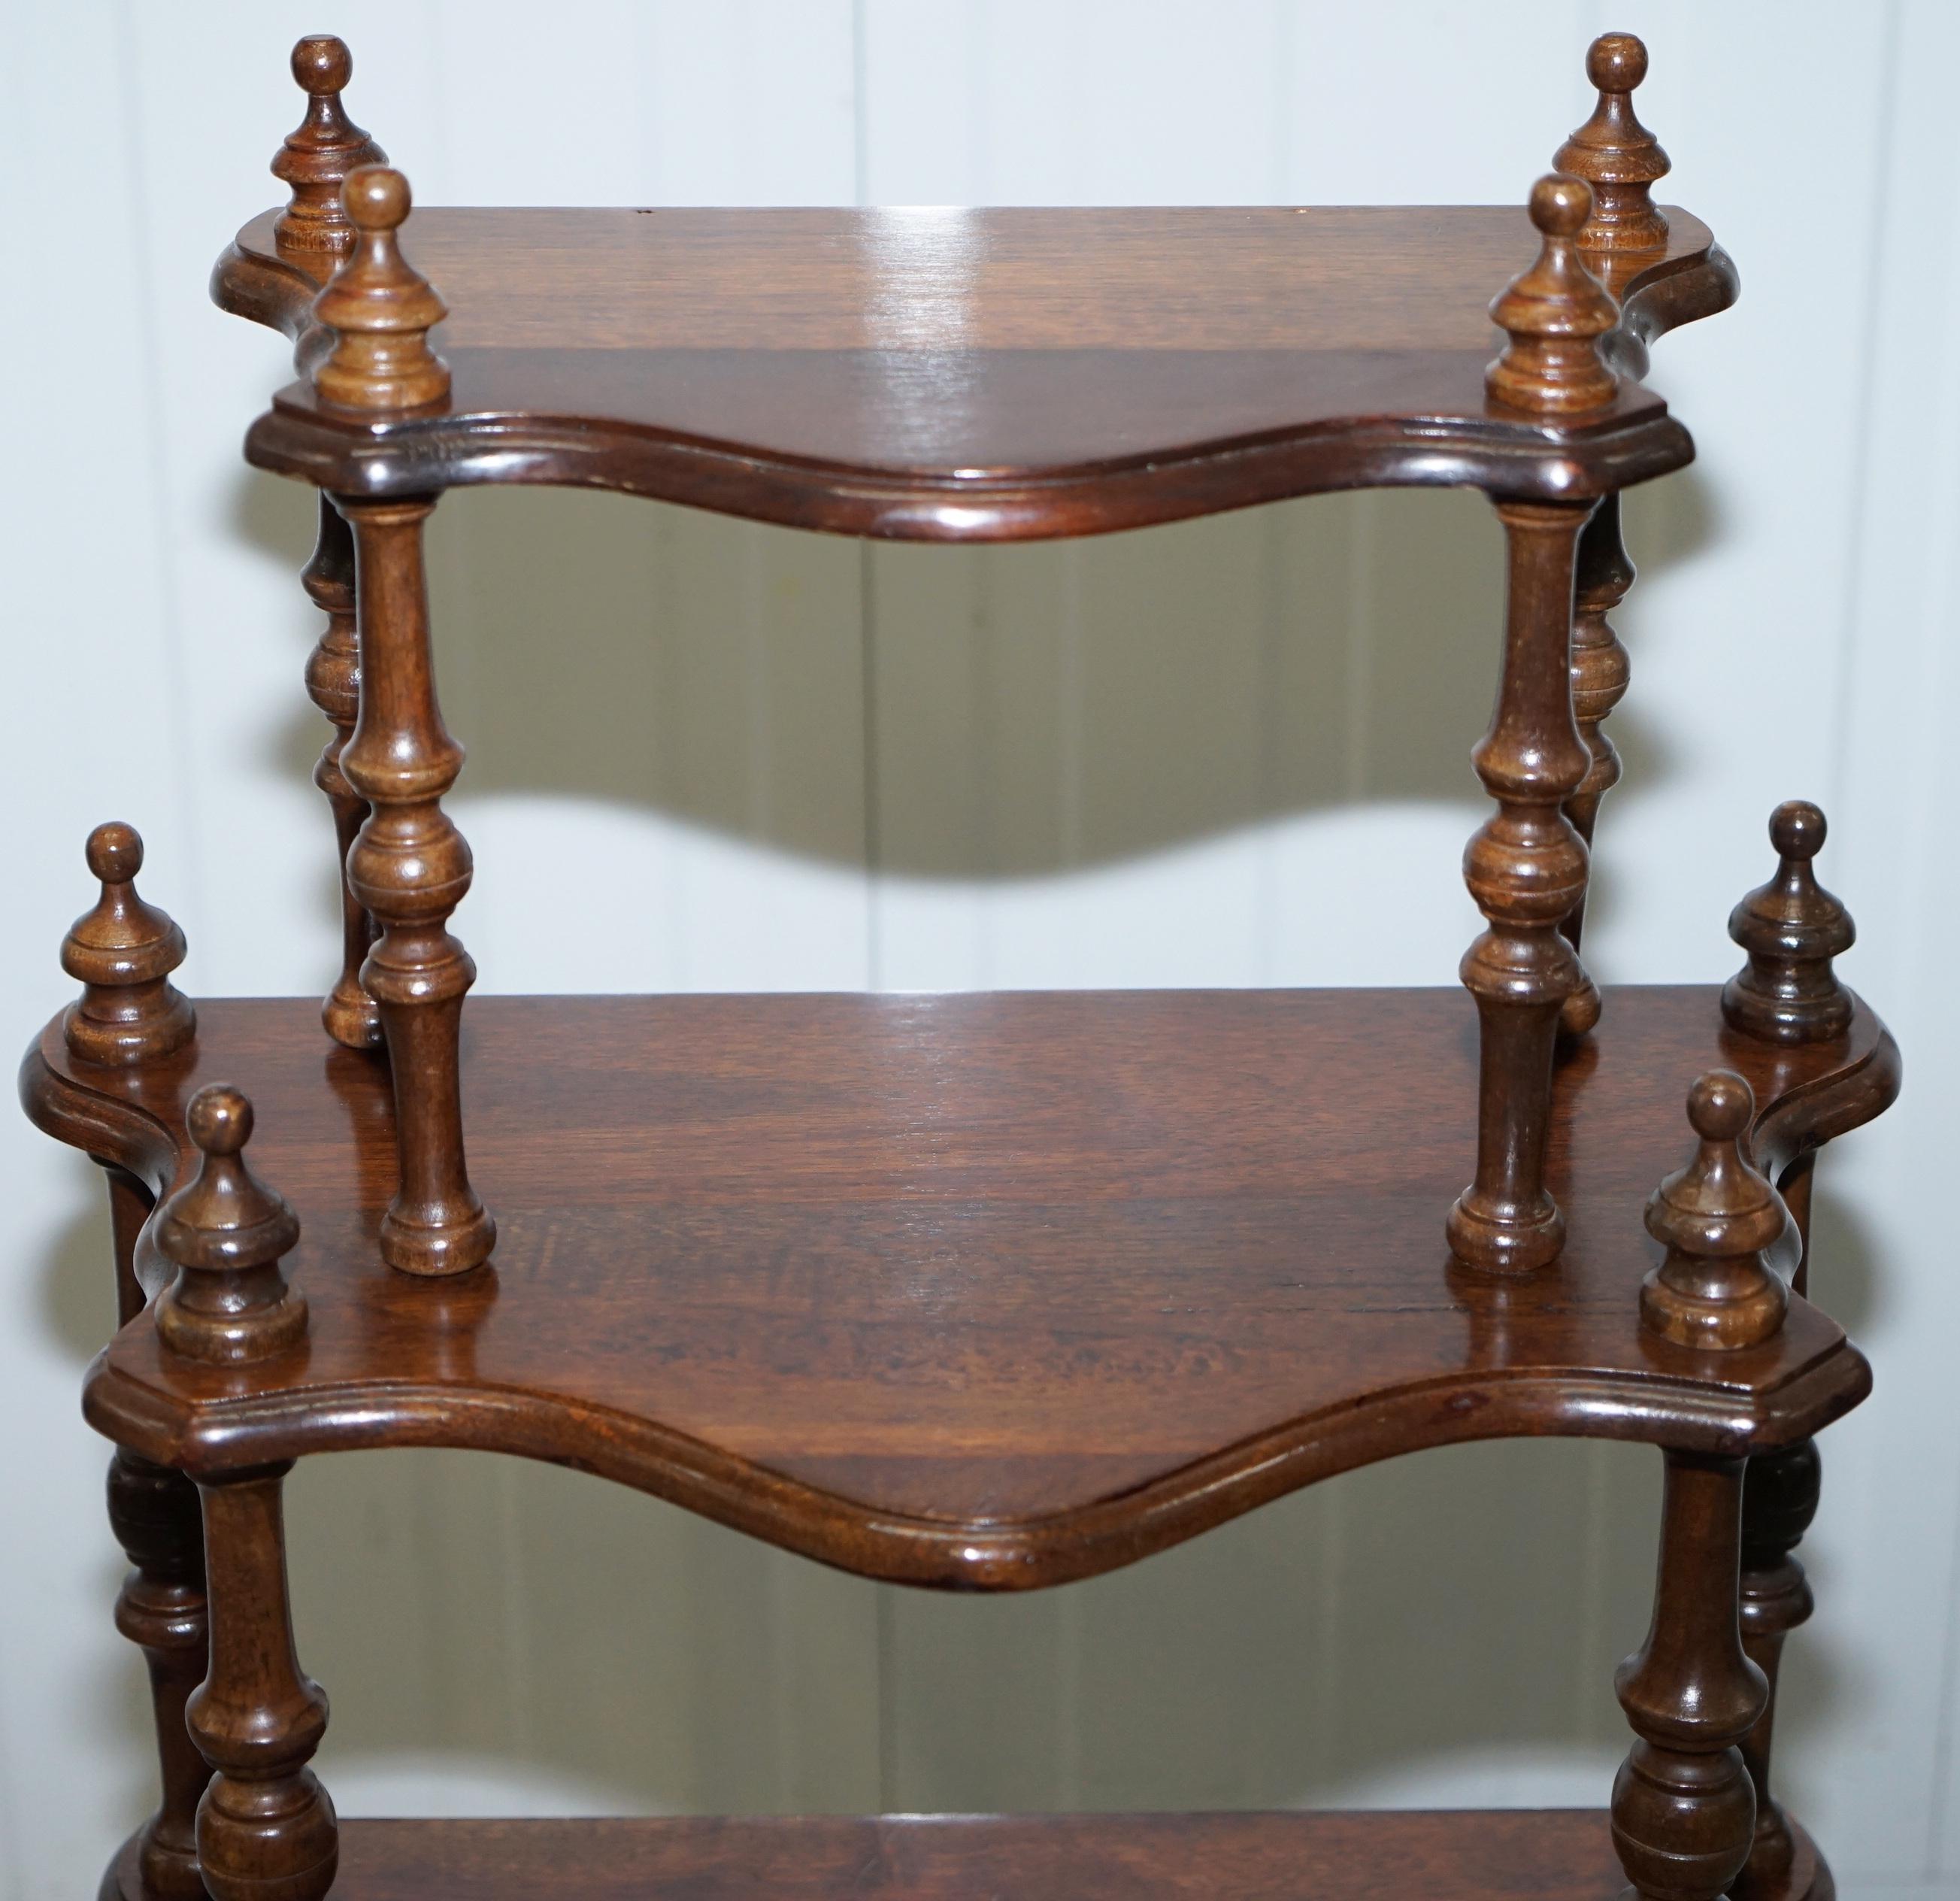 20th Century Lovely Small Mahogany Whatnot Bookcase Nicely Turned Pillars Functional Piece